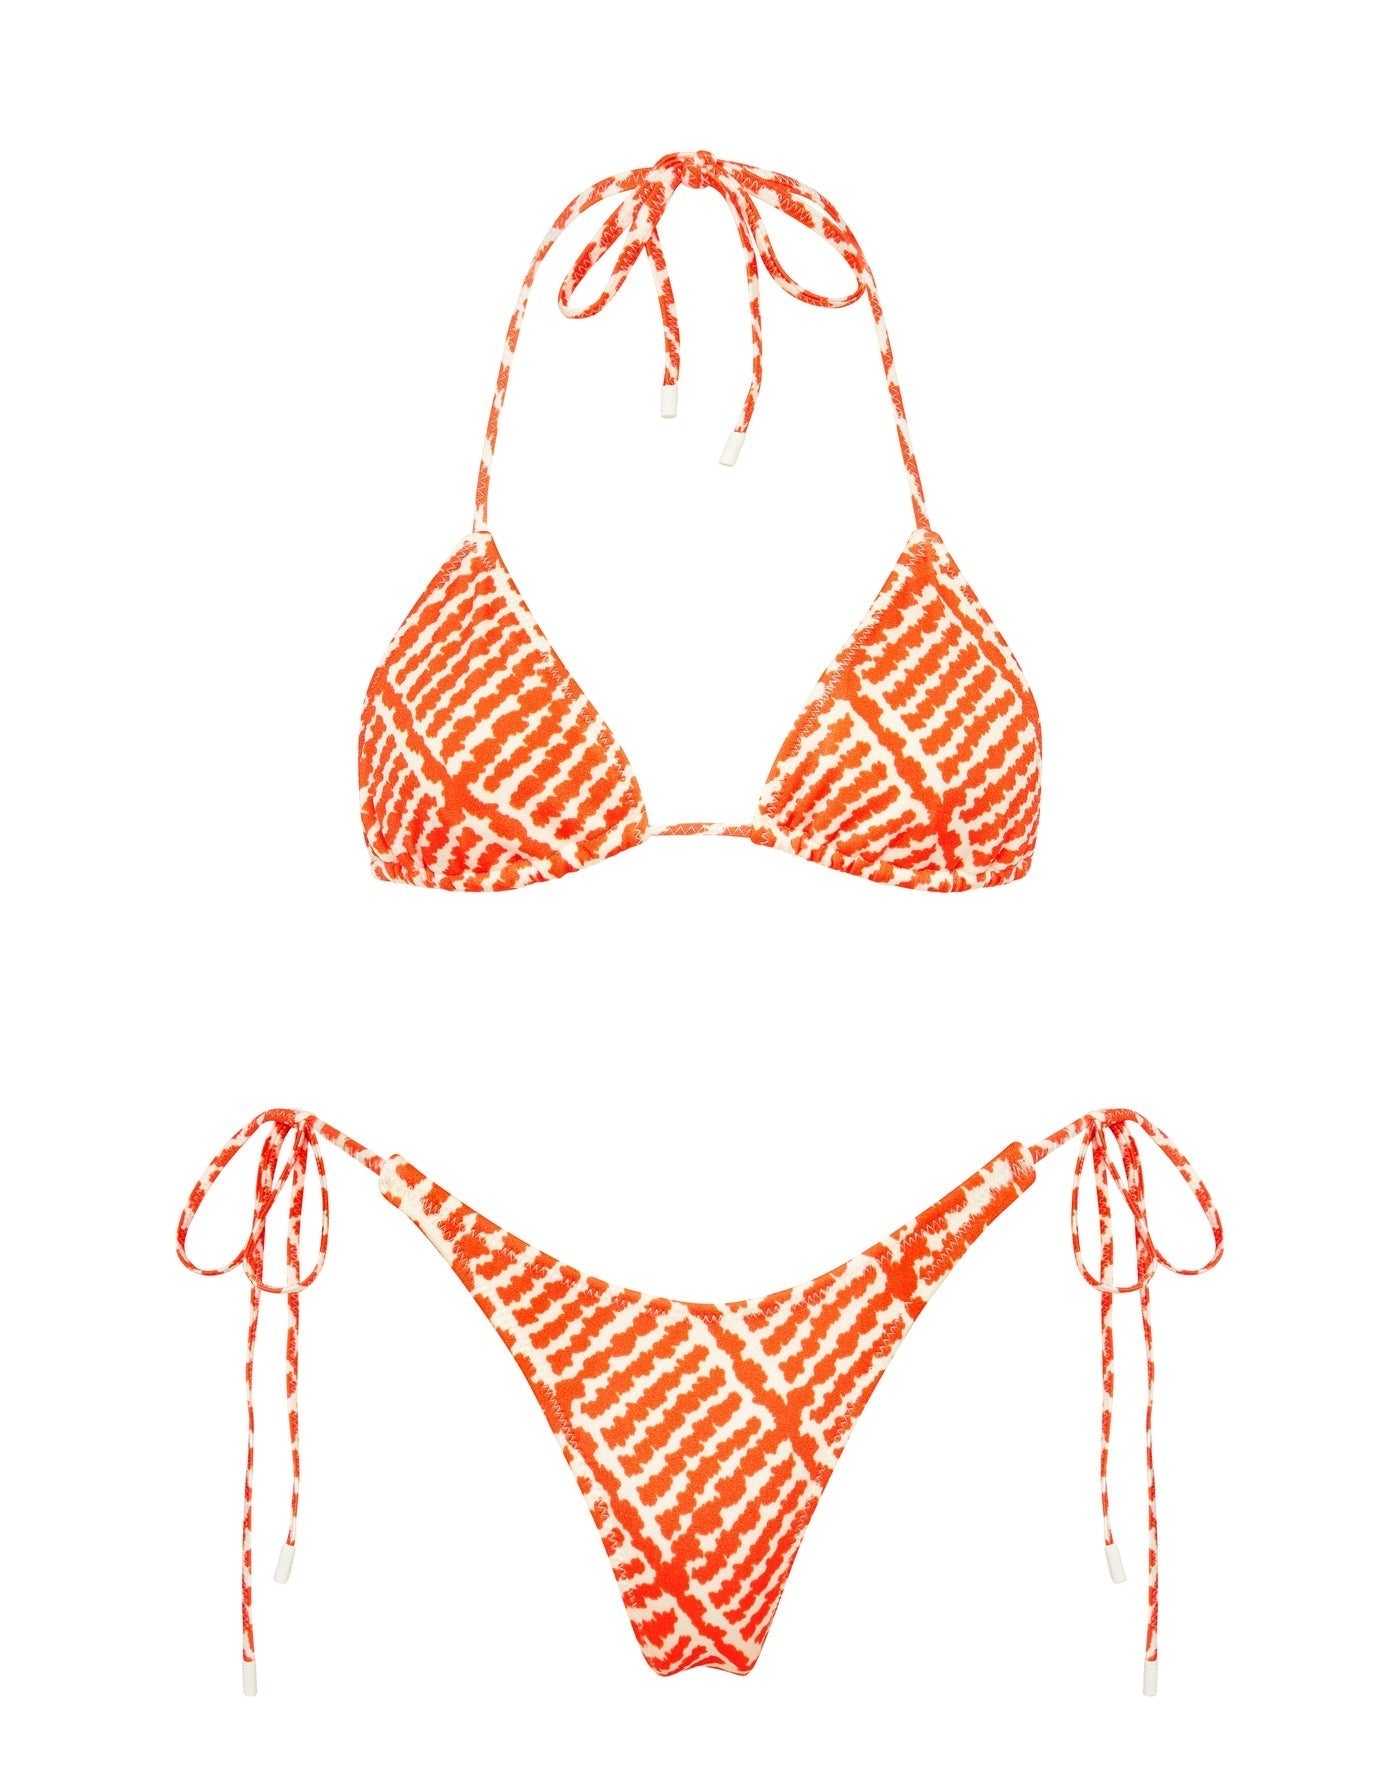 Styling the Triangl Bikini for Different Body Types